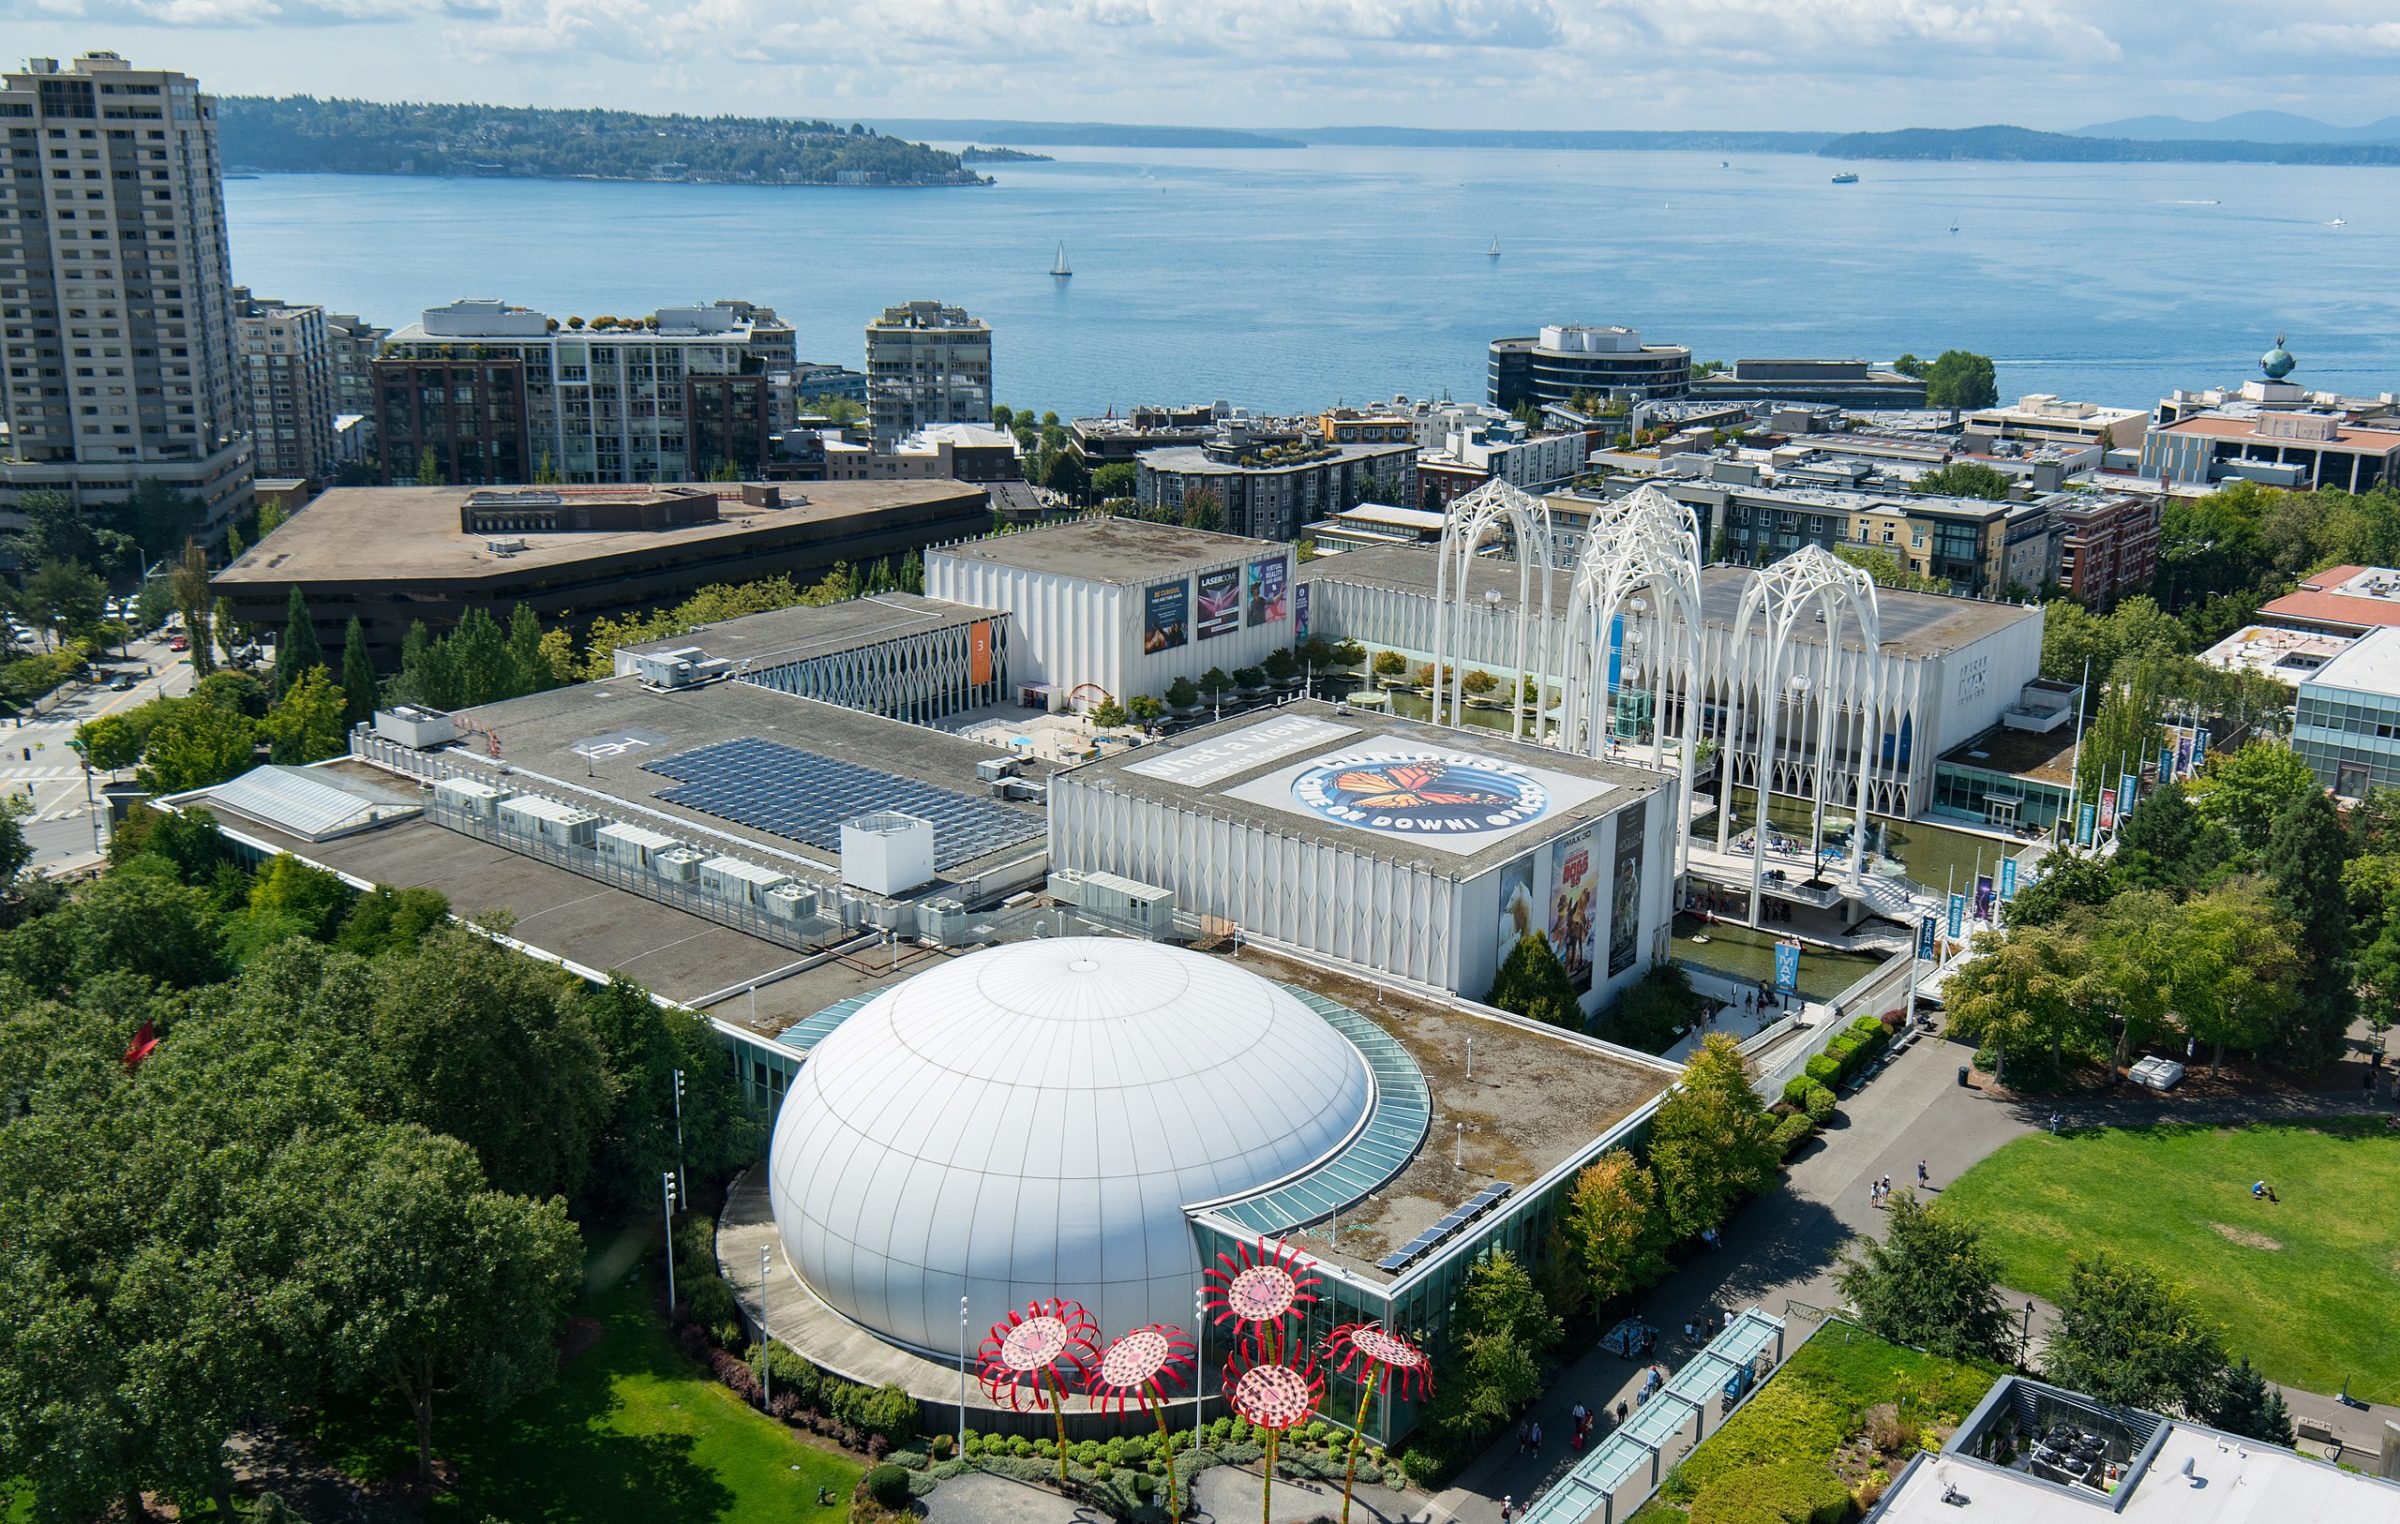 Pacific Science Center from Space Needle